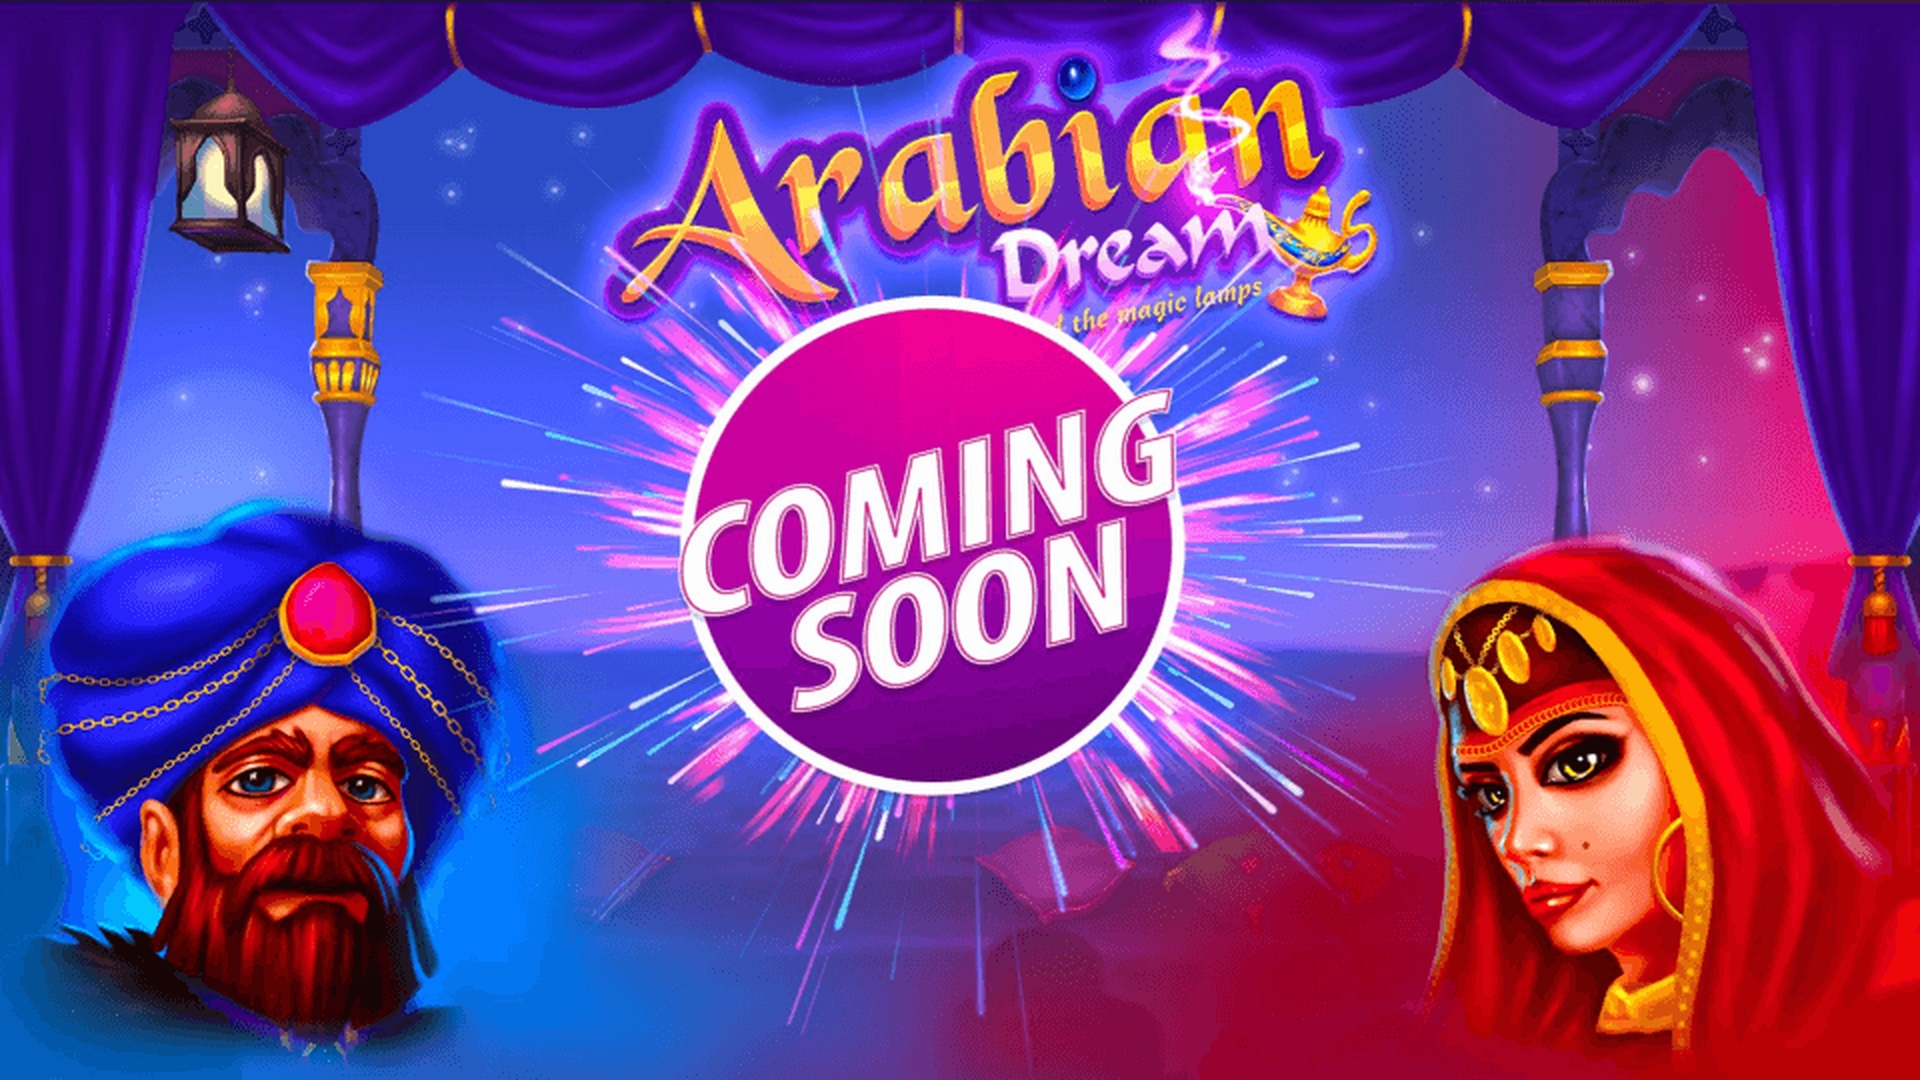 The Arabian Dream Online Slot Demo Game by ZEUS PLAY